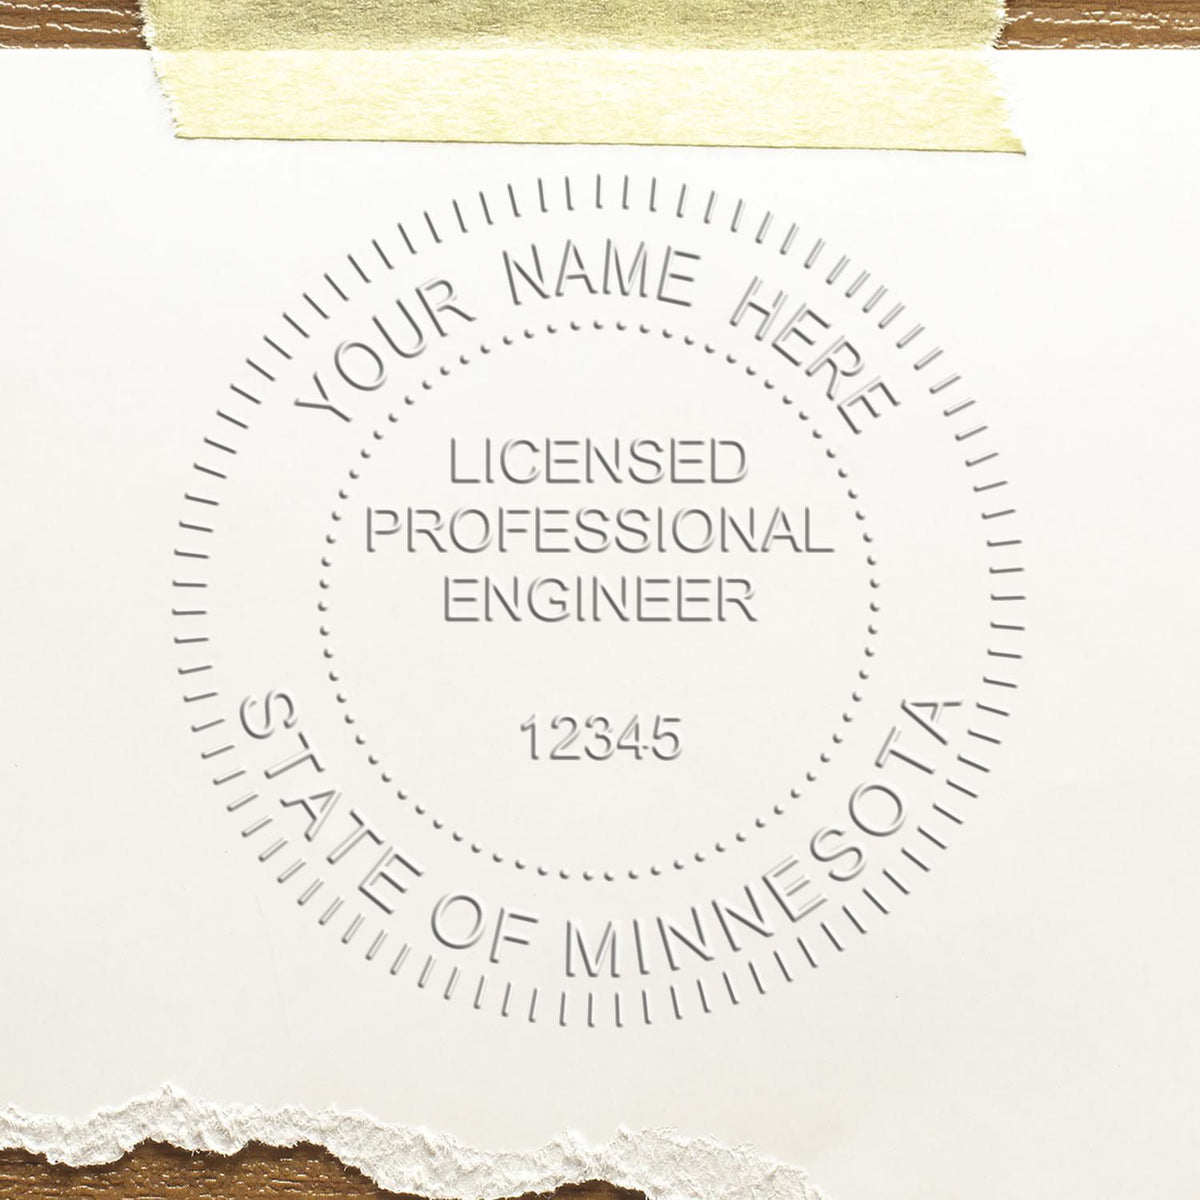 The Gift Minnesota Engineer Seal stamp impression comes to life with a crisp, detailed image stamped on paper - showcasing true professional quality.